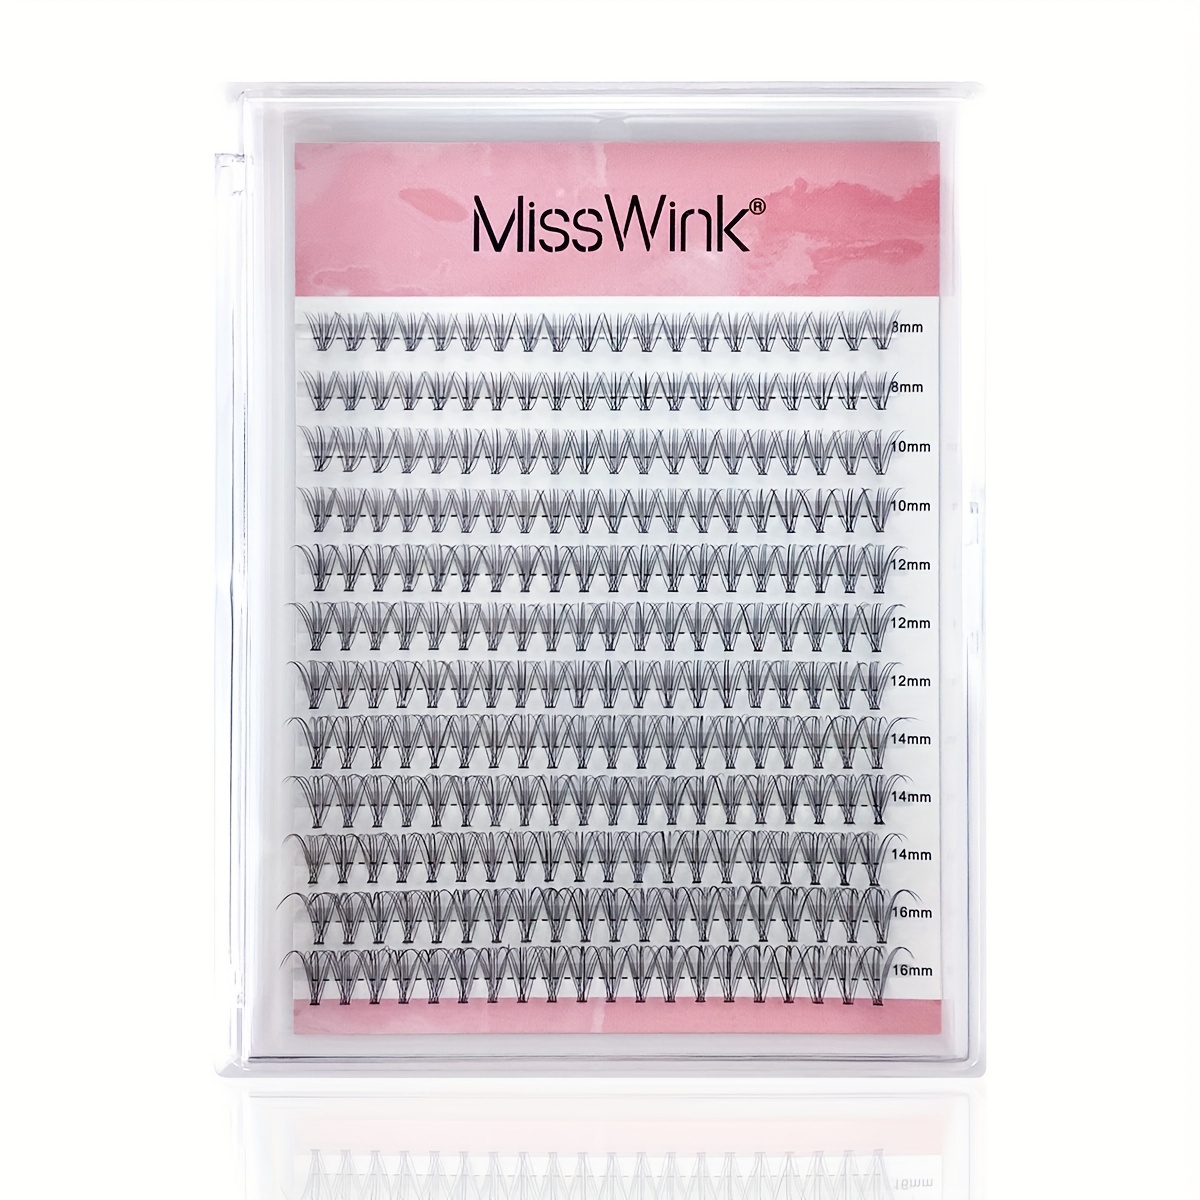 

10d, Large 12 Row Set, 8-16mm Single Cluster Eyelashes, Light And Soft, For Natural Makeup Look